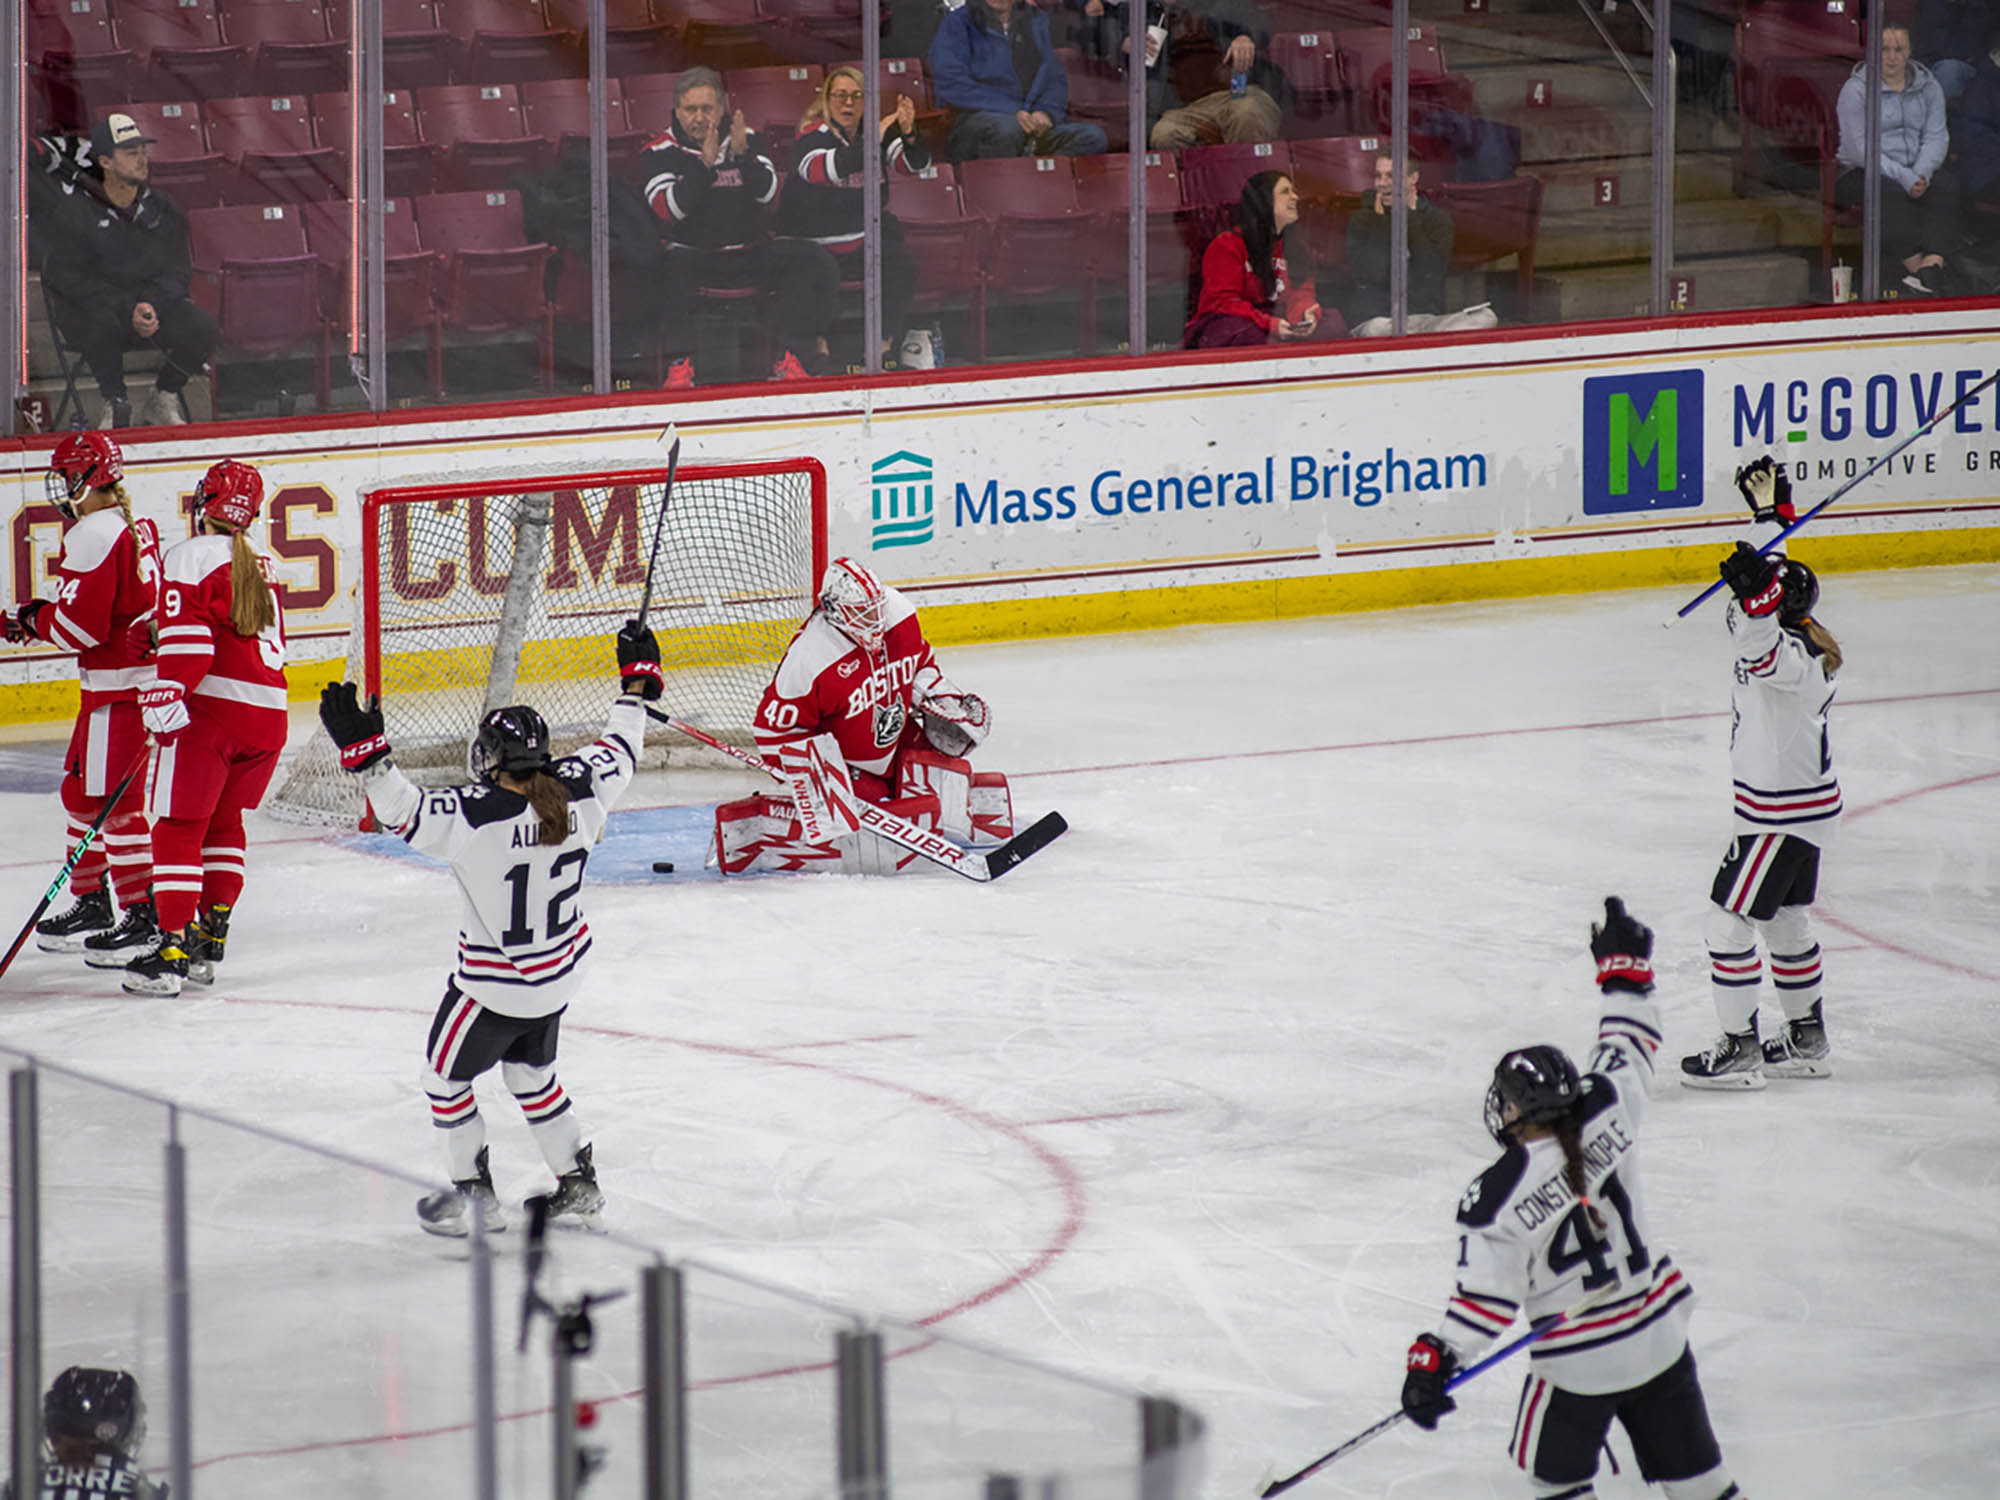 Photo: NE Huskies celebrate their goal on an ice rink in their navy and white uniforms. The BU Terrier team is in all red with white detailing uniforms. They are at the foreground of the photo. In the background, behind the protective glass, spectators of the game sit sporadically in the left area of the photo.